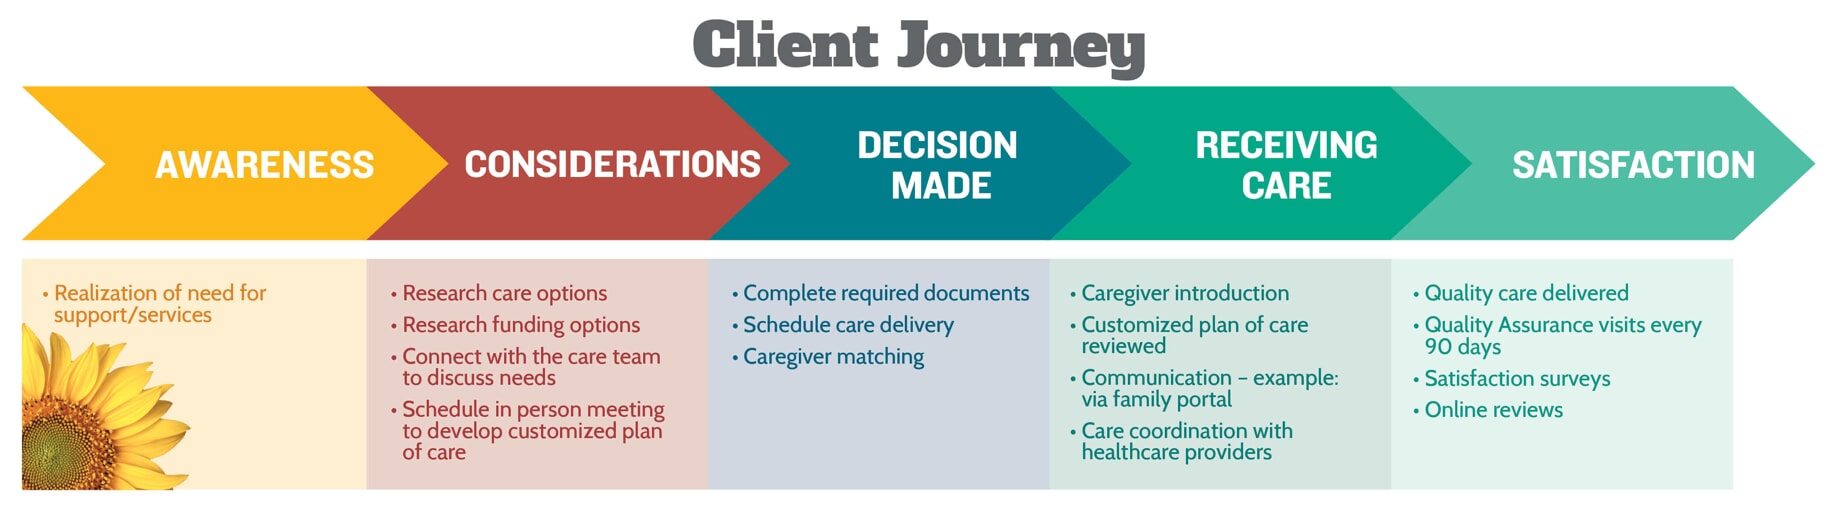 graphic depicting the client journey